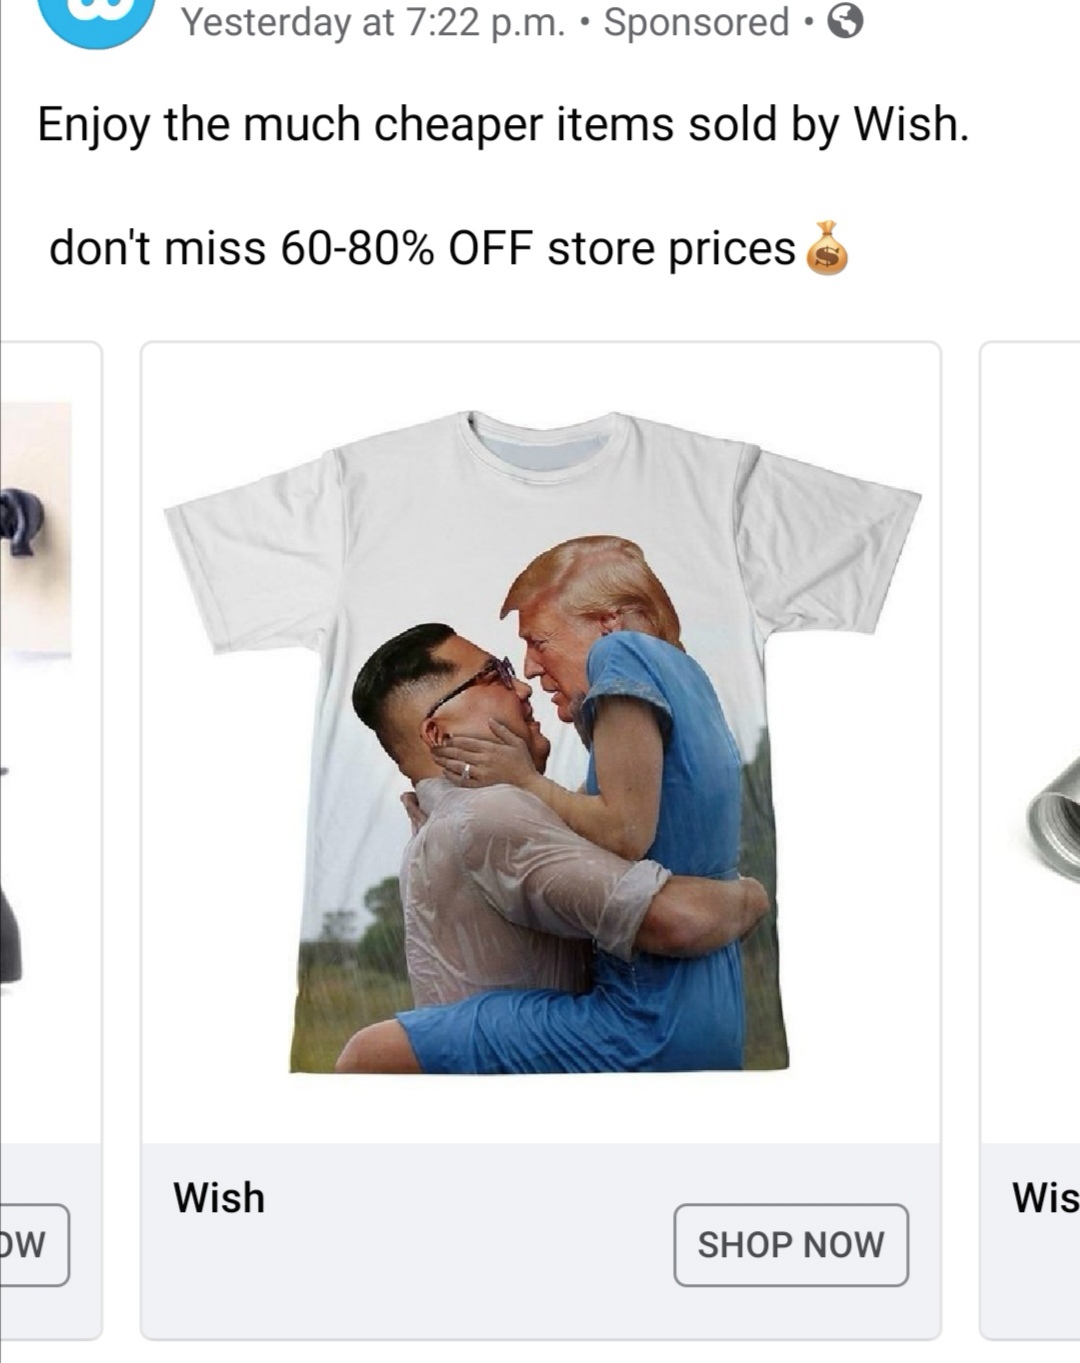 t shirt trump kim - Yesterday at p.m. Sponsored Enjoy the much cheaper items sold by Wish. don't miss 6080% Off store prices s Wish Wis Dw Shop Now